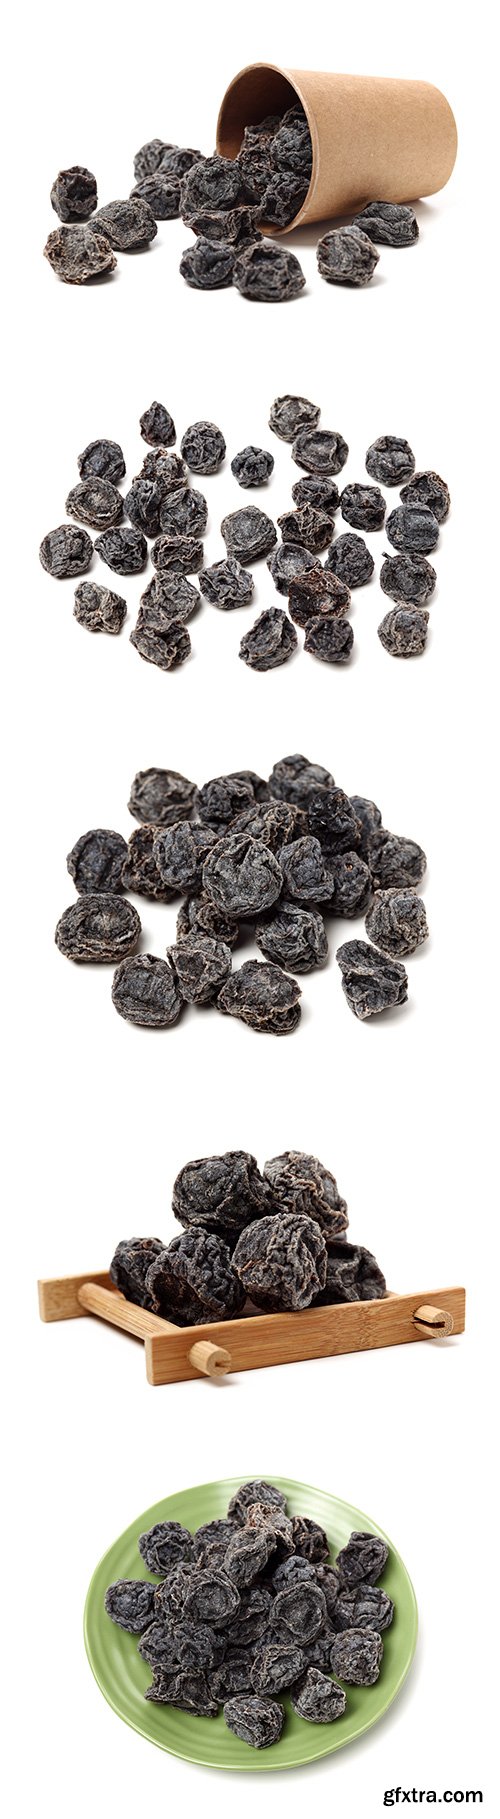 Dried Black Plums Isolated - 7xJPGs